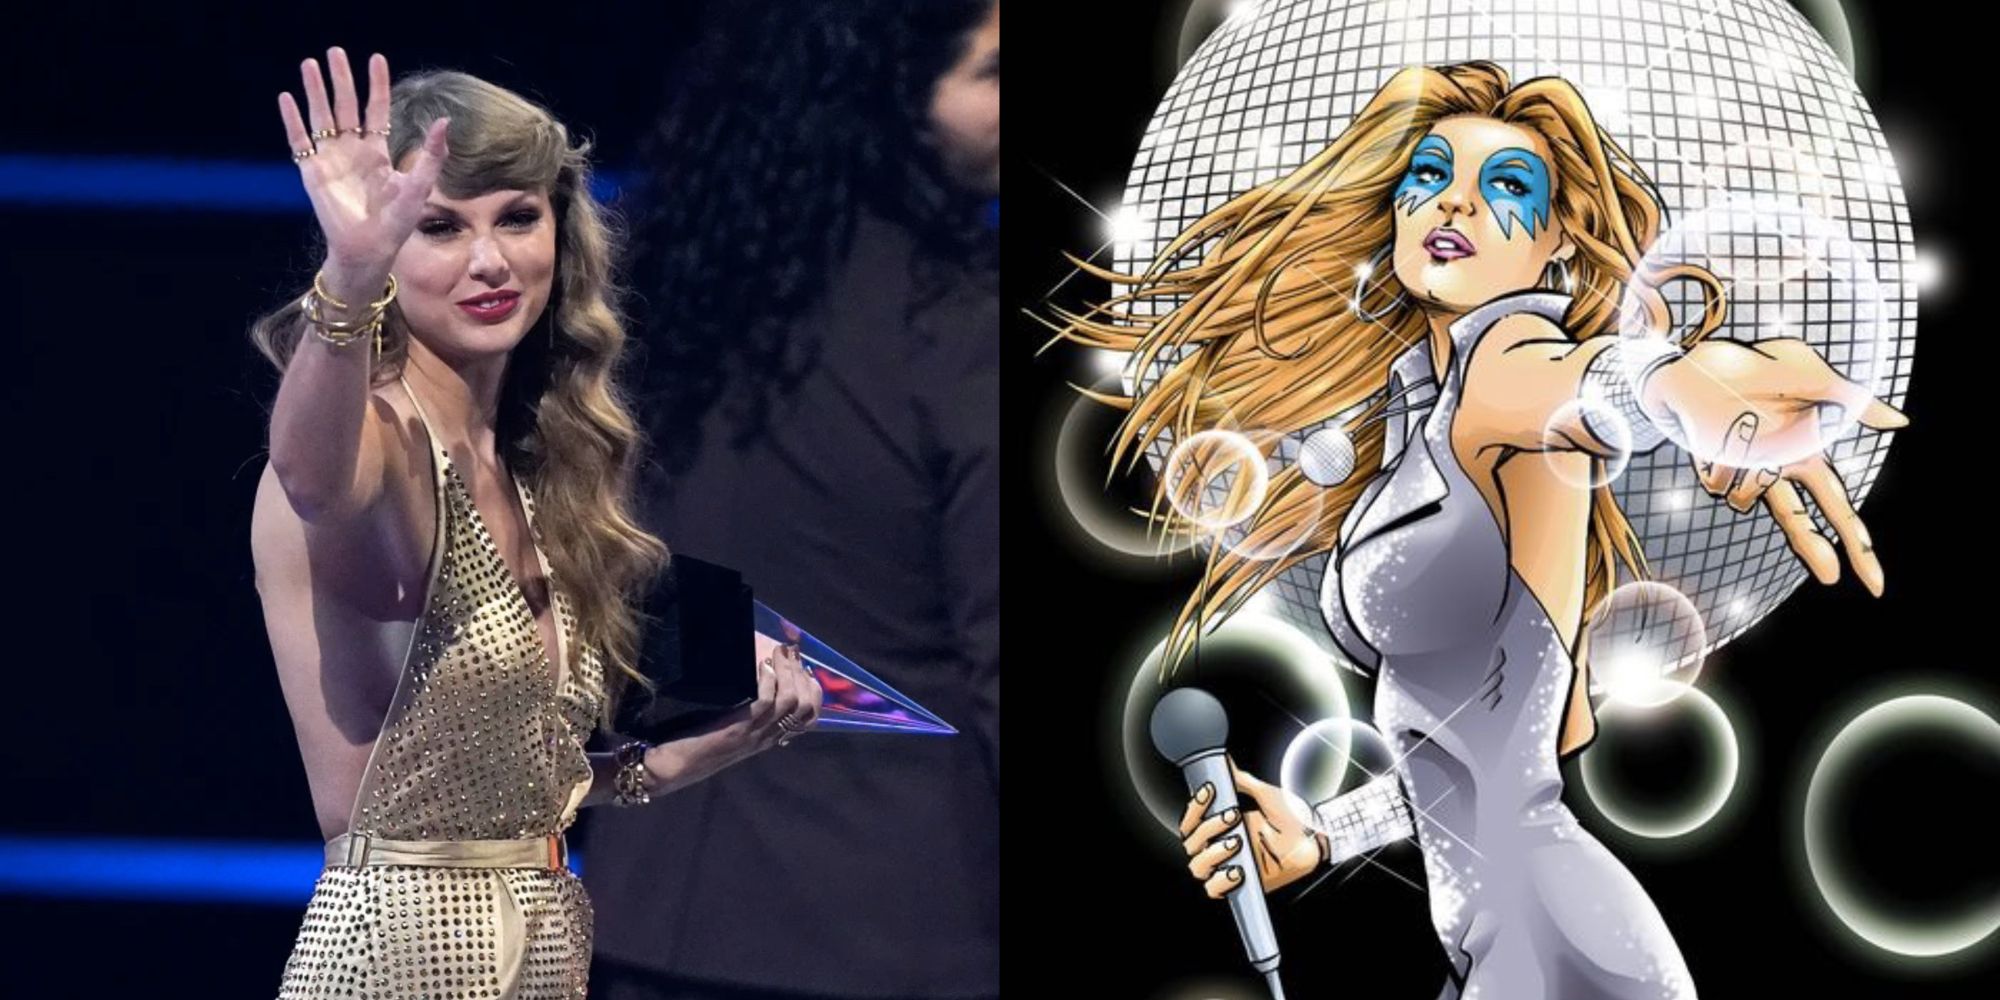 taylor swift and dazzler looking a lot alike